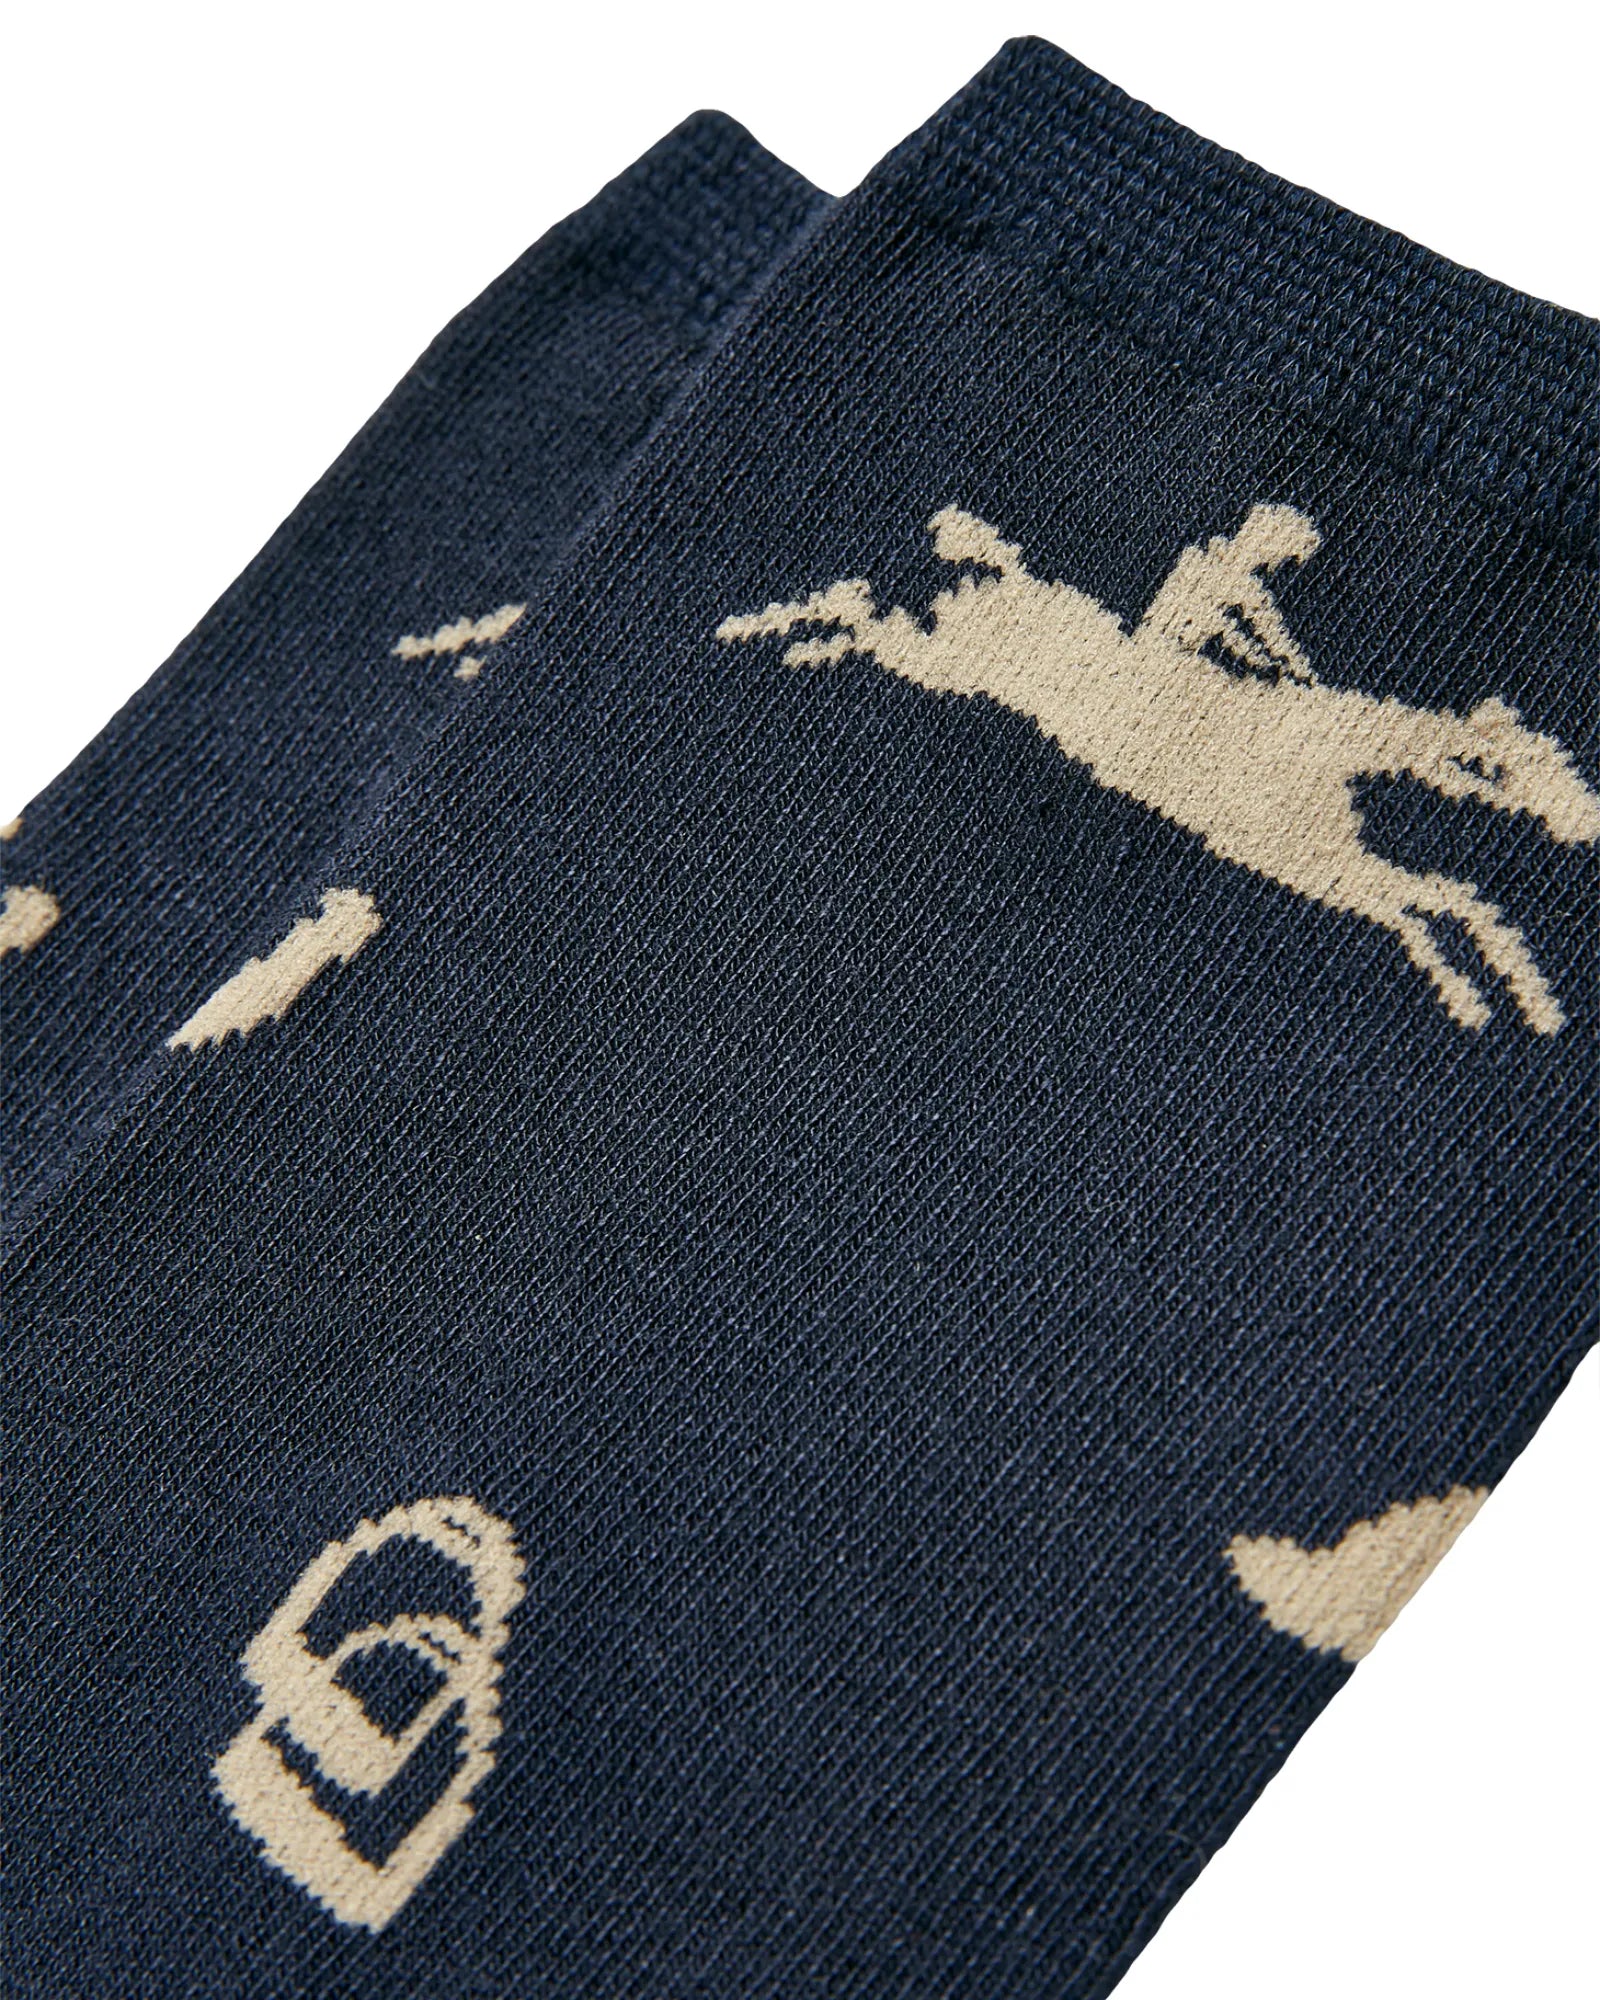 Excellent Everyday Pair Of Socks - Navy Horse